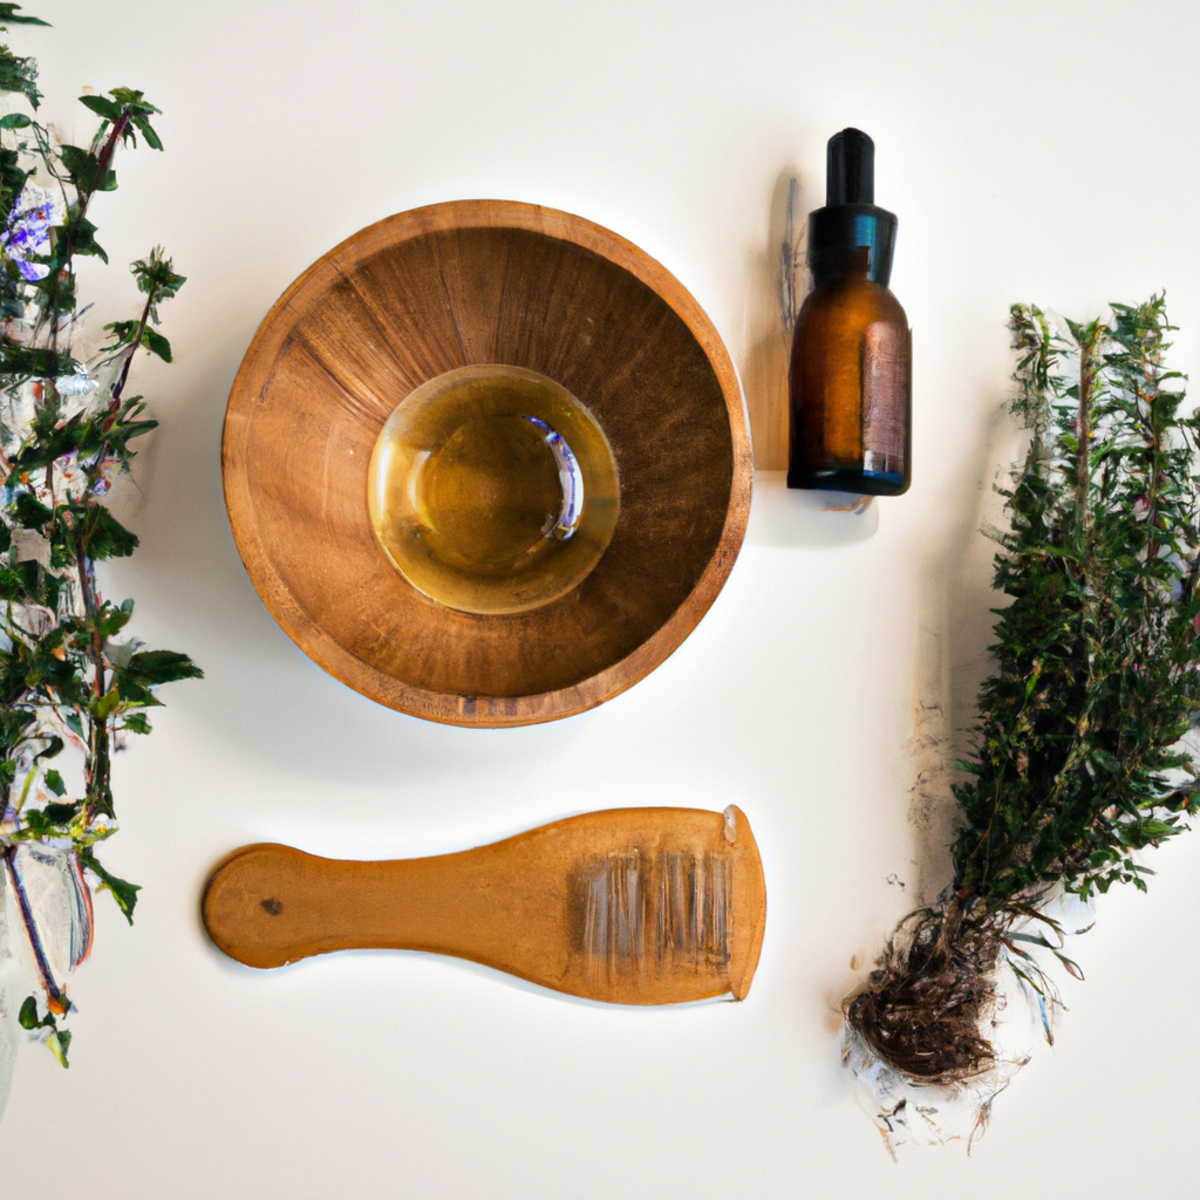 Natural hair growth tools: wooden comb, essential oil, and fresh herbs (rosemary, lavender, thyme) on a surface.